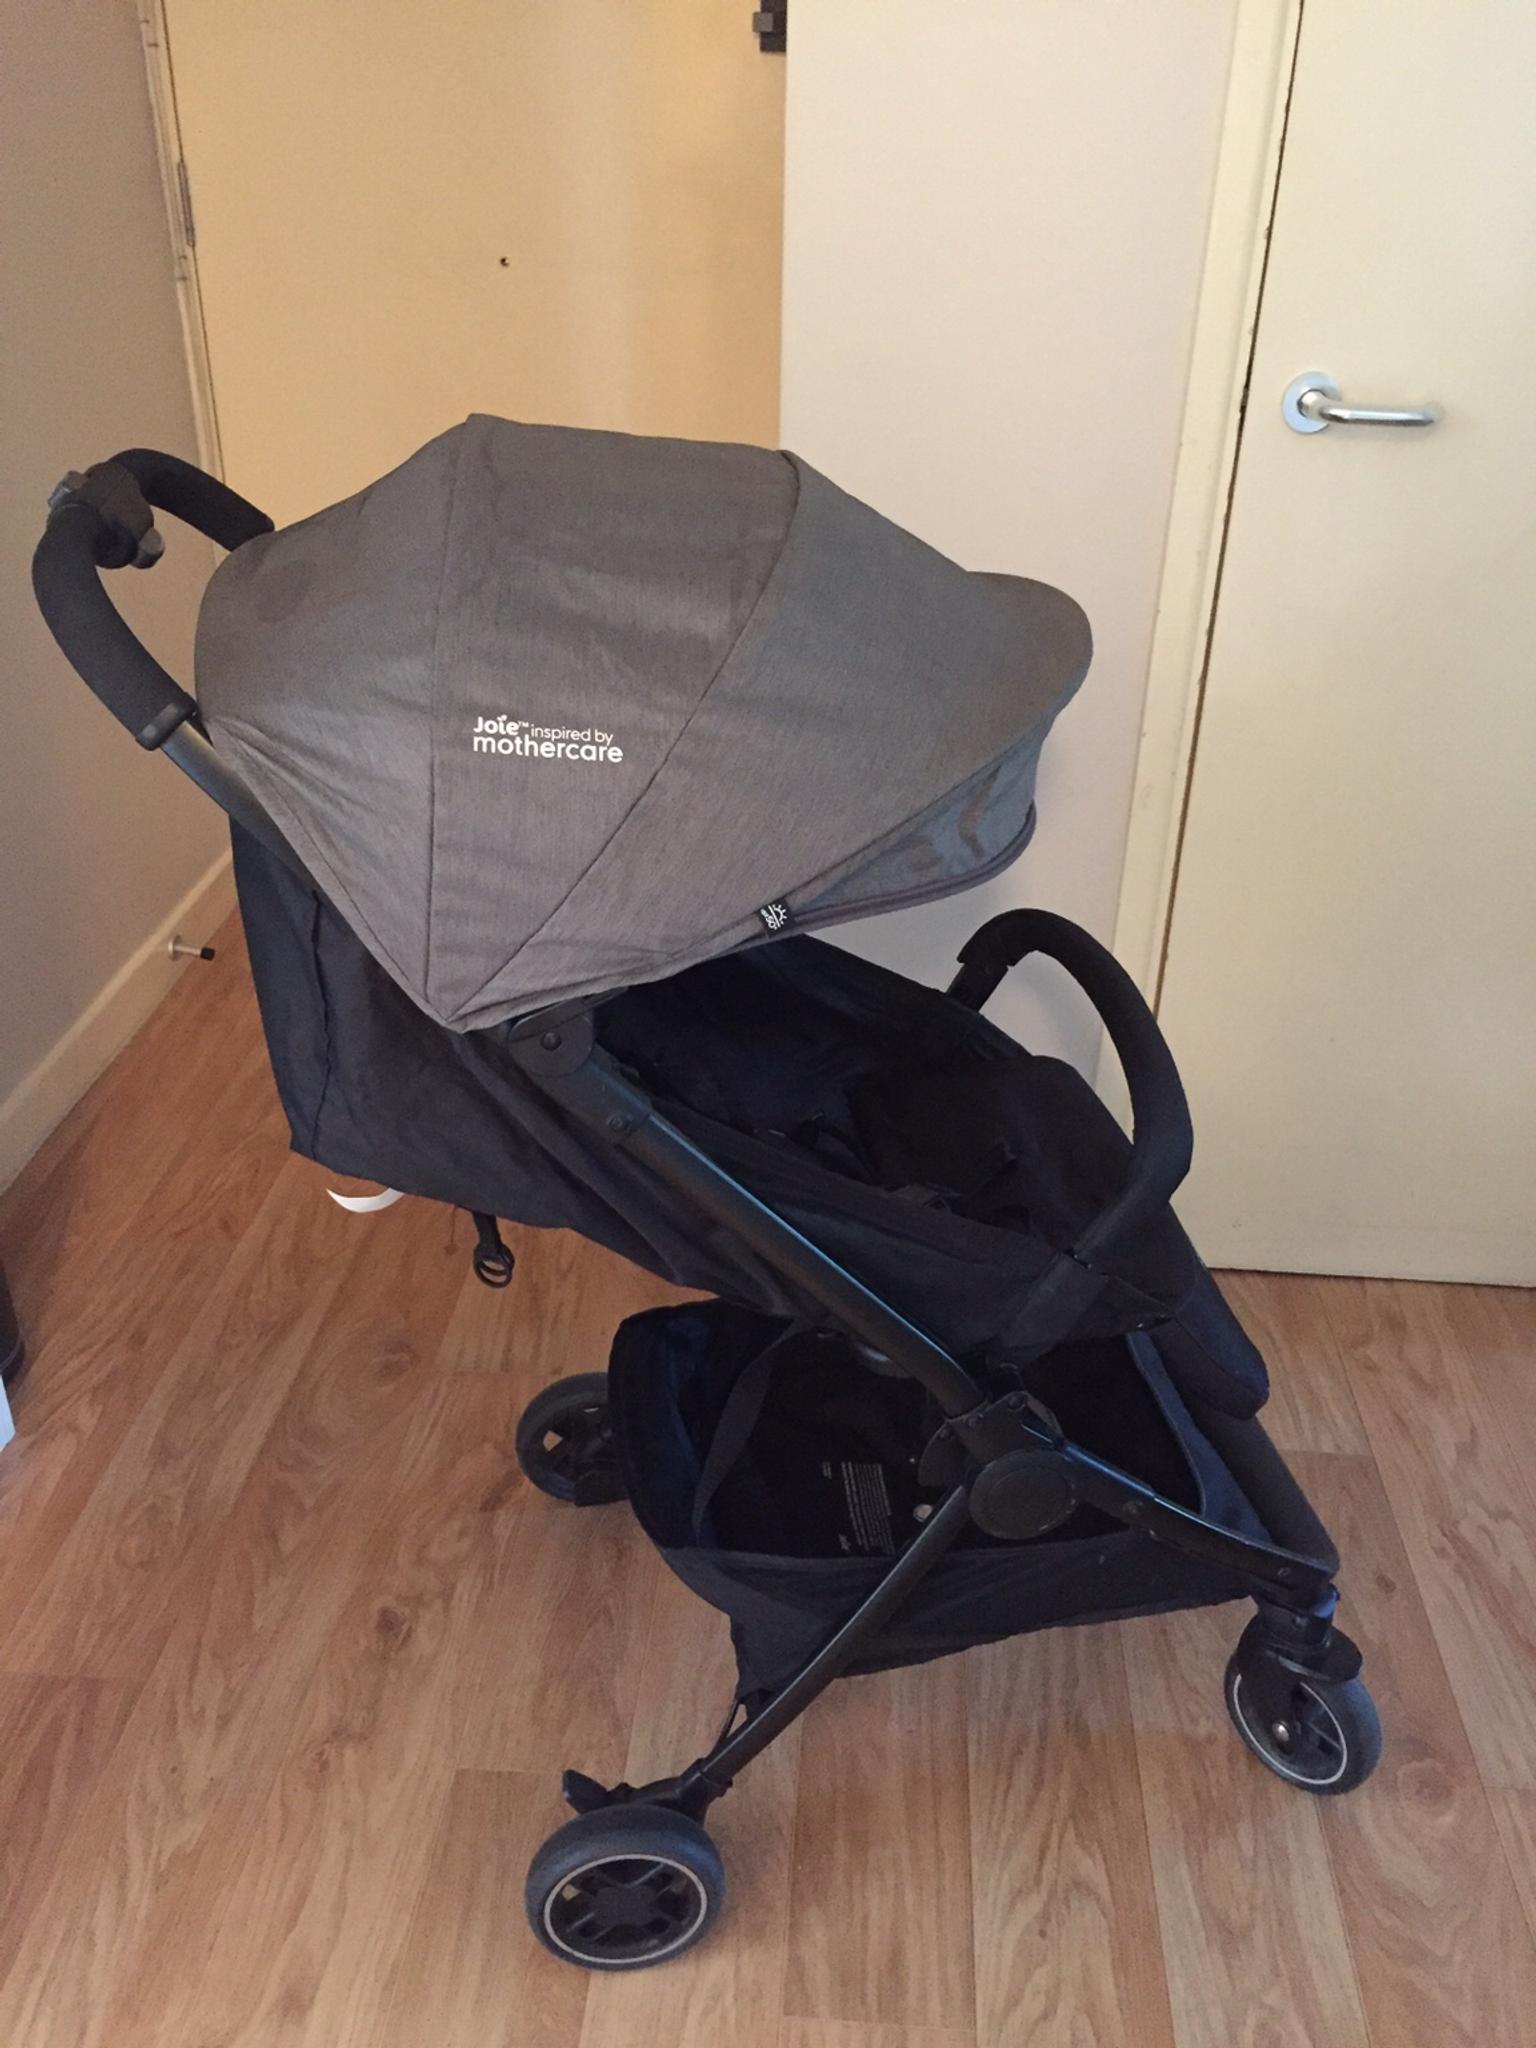 joie travi stroller review